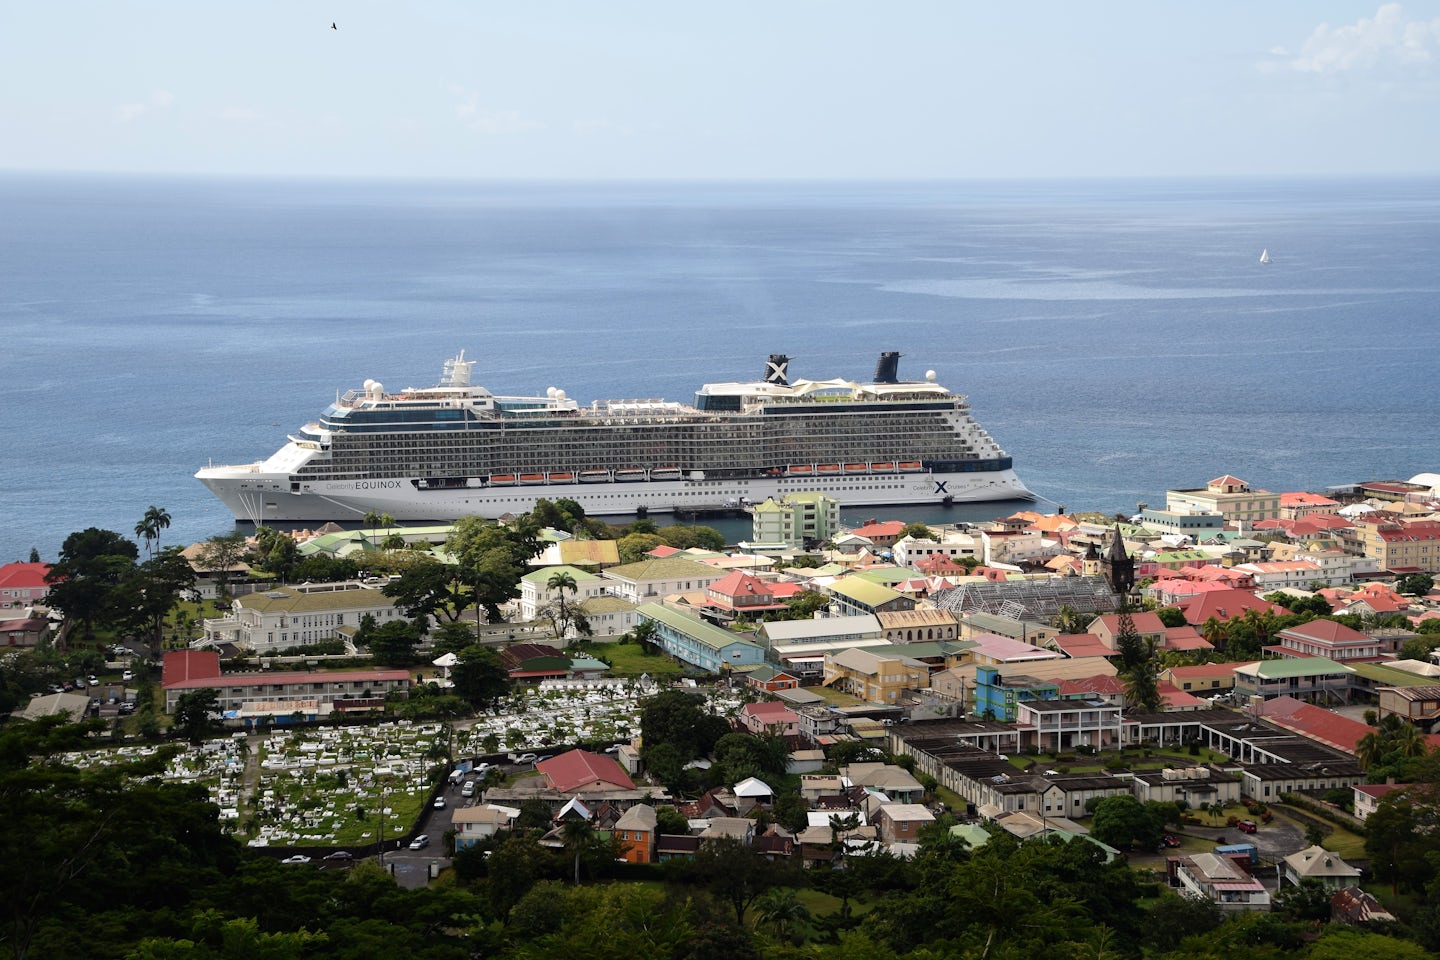 View of ship from Dominica mountainside